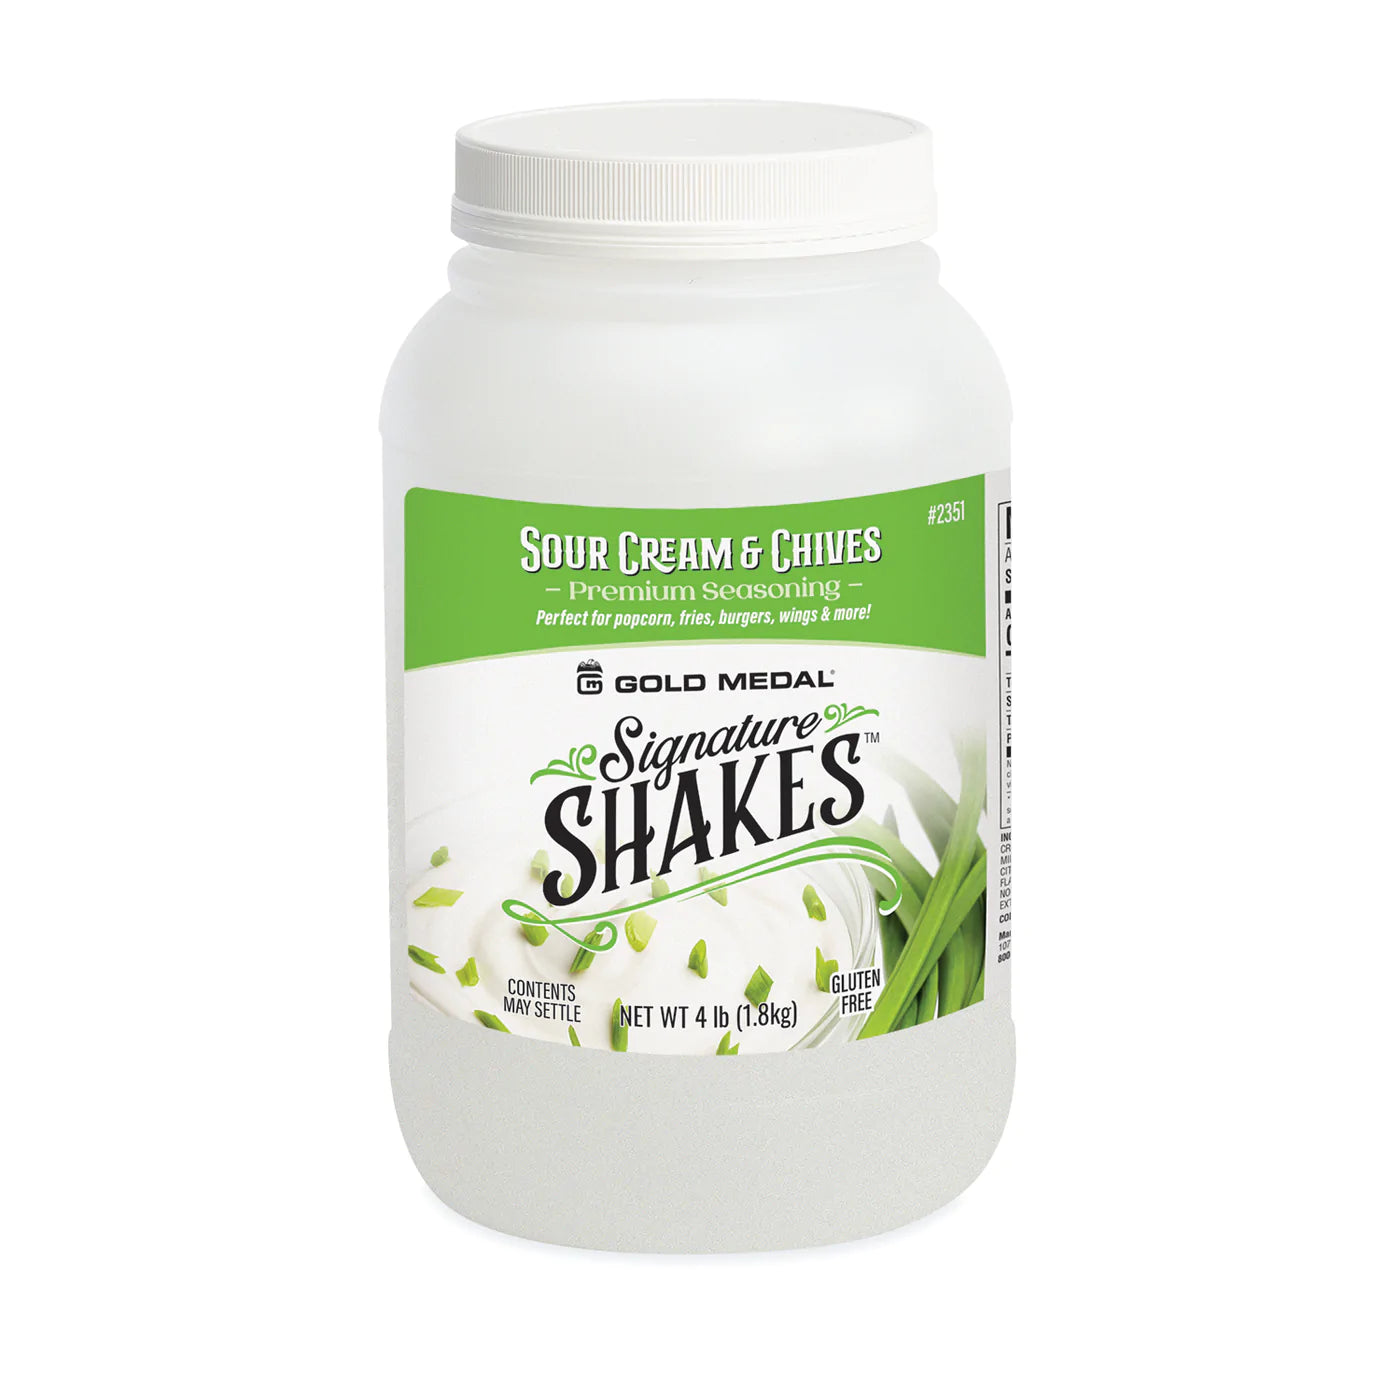 Sour Cream & Chives - Shake Ons